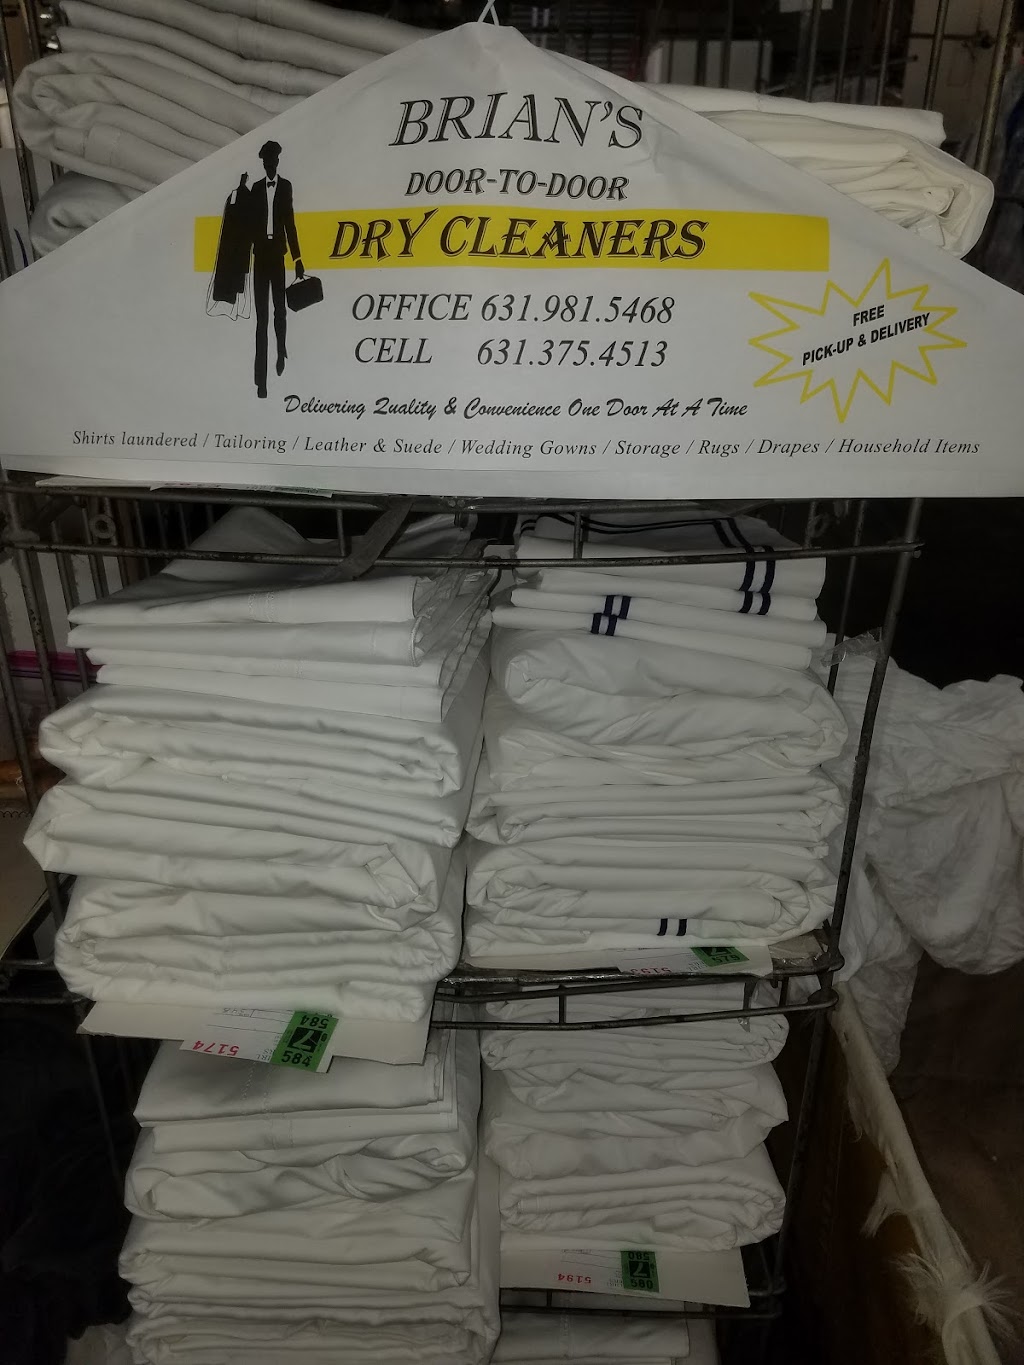 Brians Door To Door Dry Cleaners & Laundry | 221 Terry Blvd, Holbrook, NY 11741 | Phone: (631) 375-4513